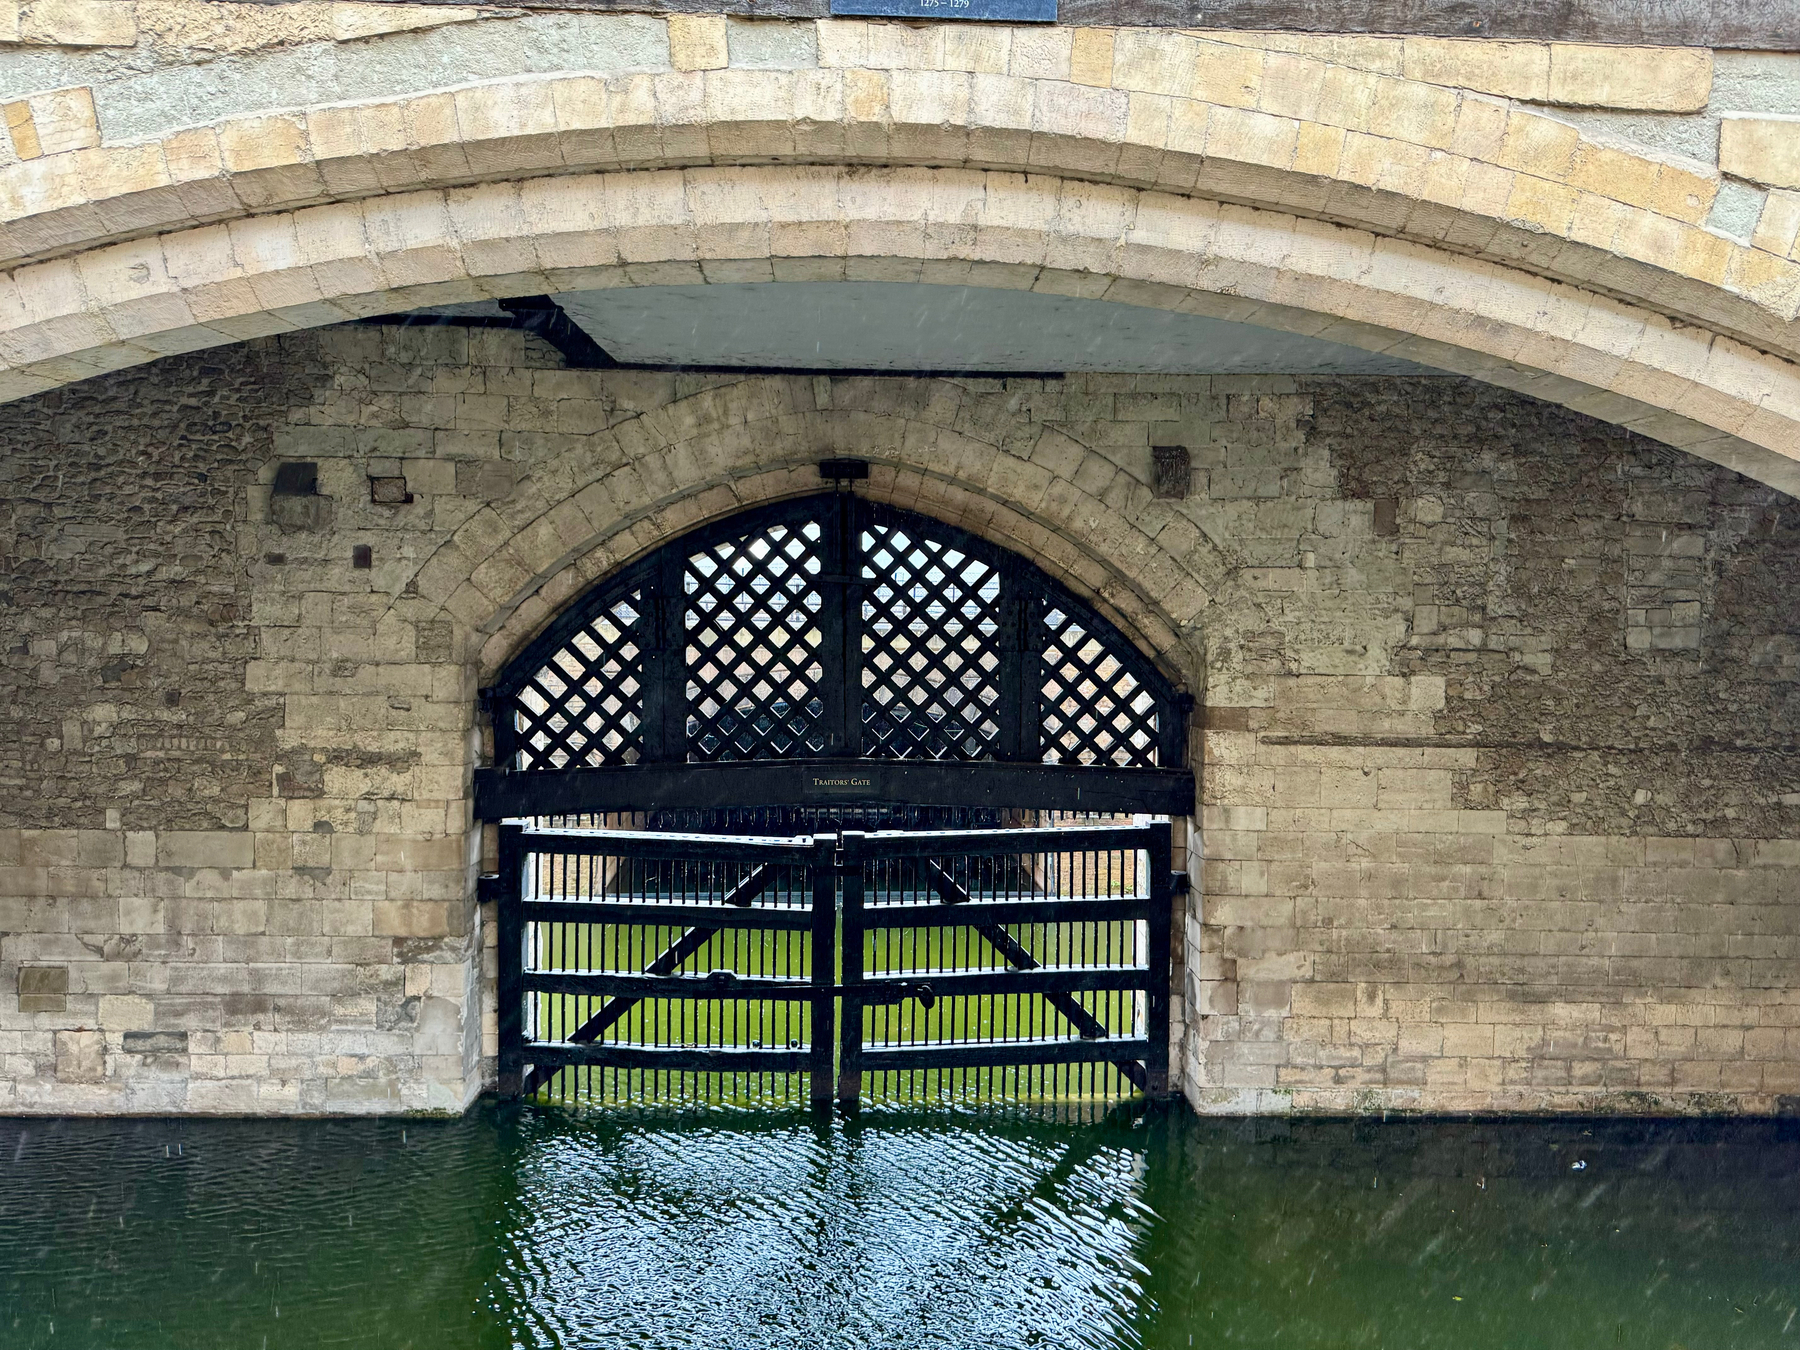 Stone bridge arch with a black lattice gate partially submerged in water, reflecting in the water below. A plaque reads “Traitors' Gate.